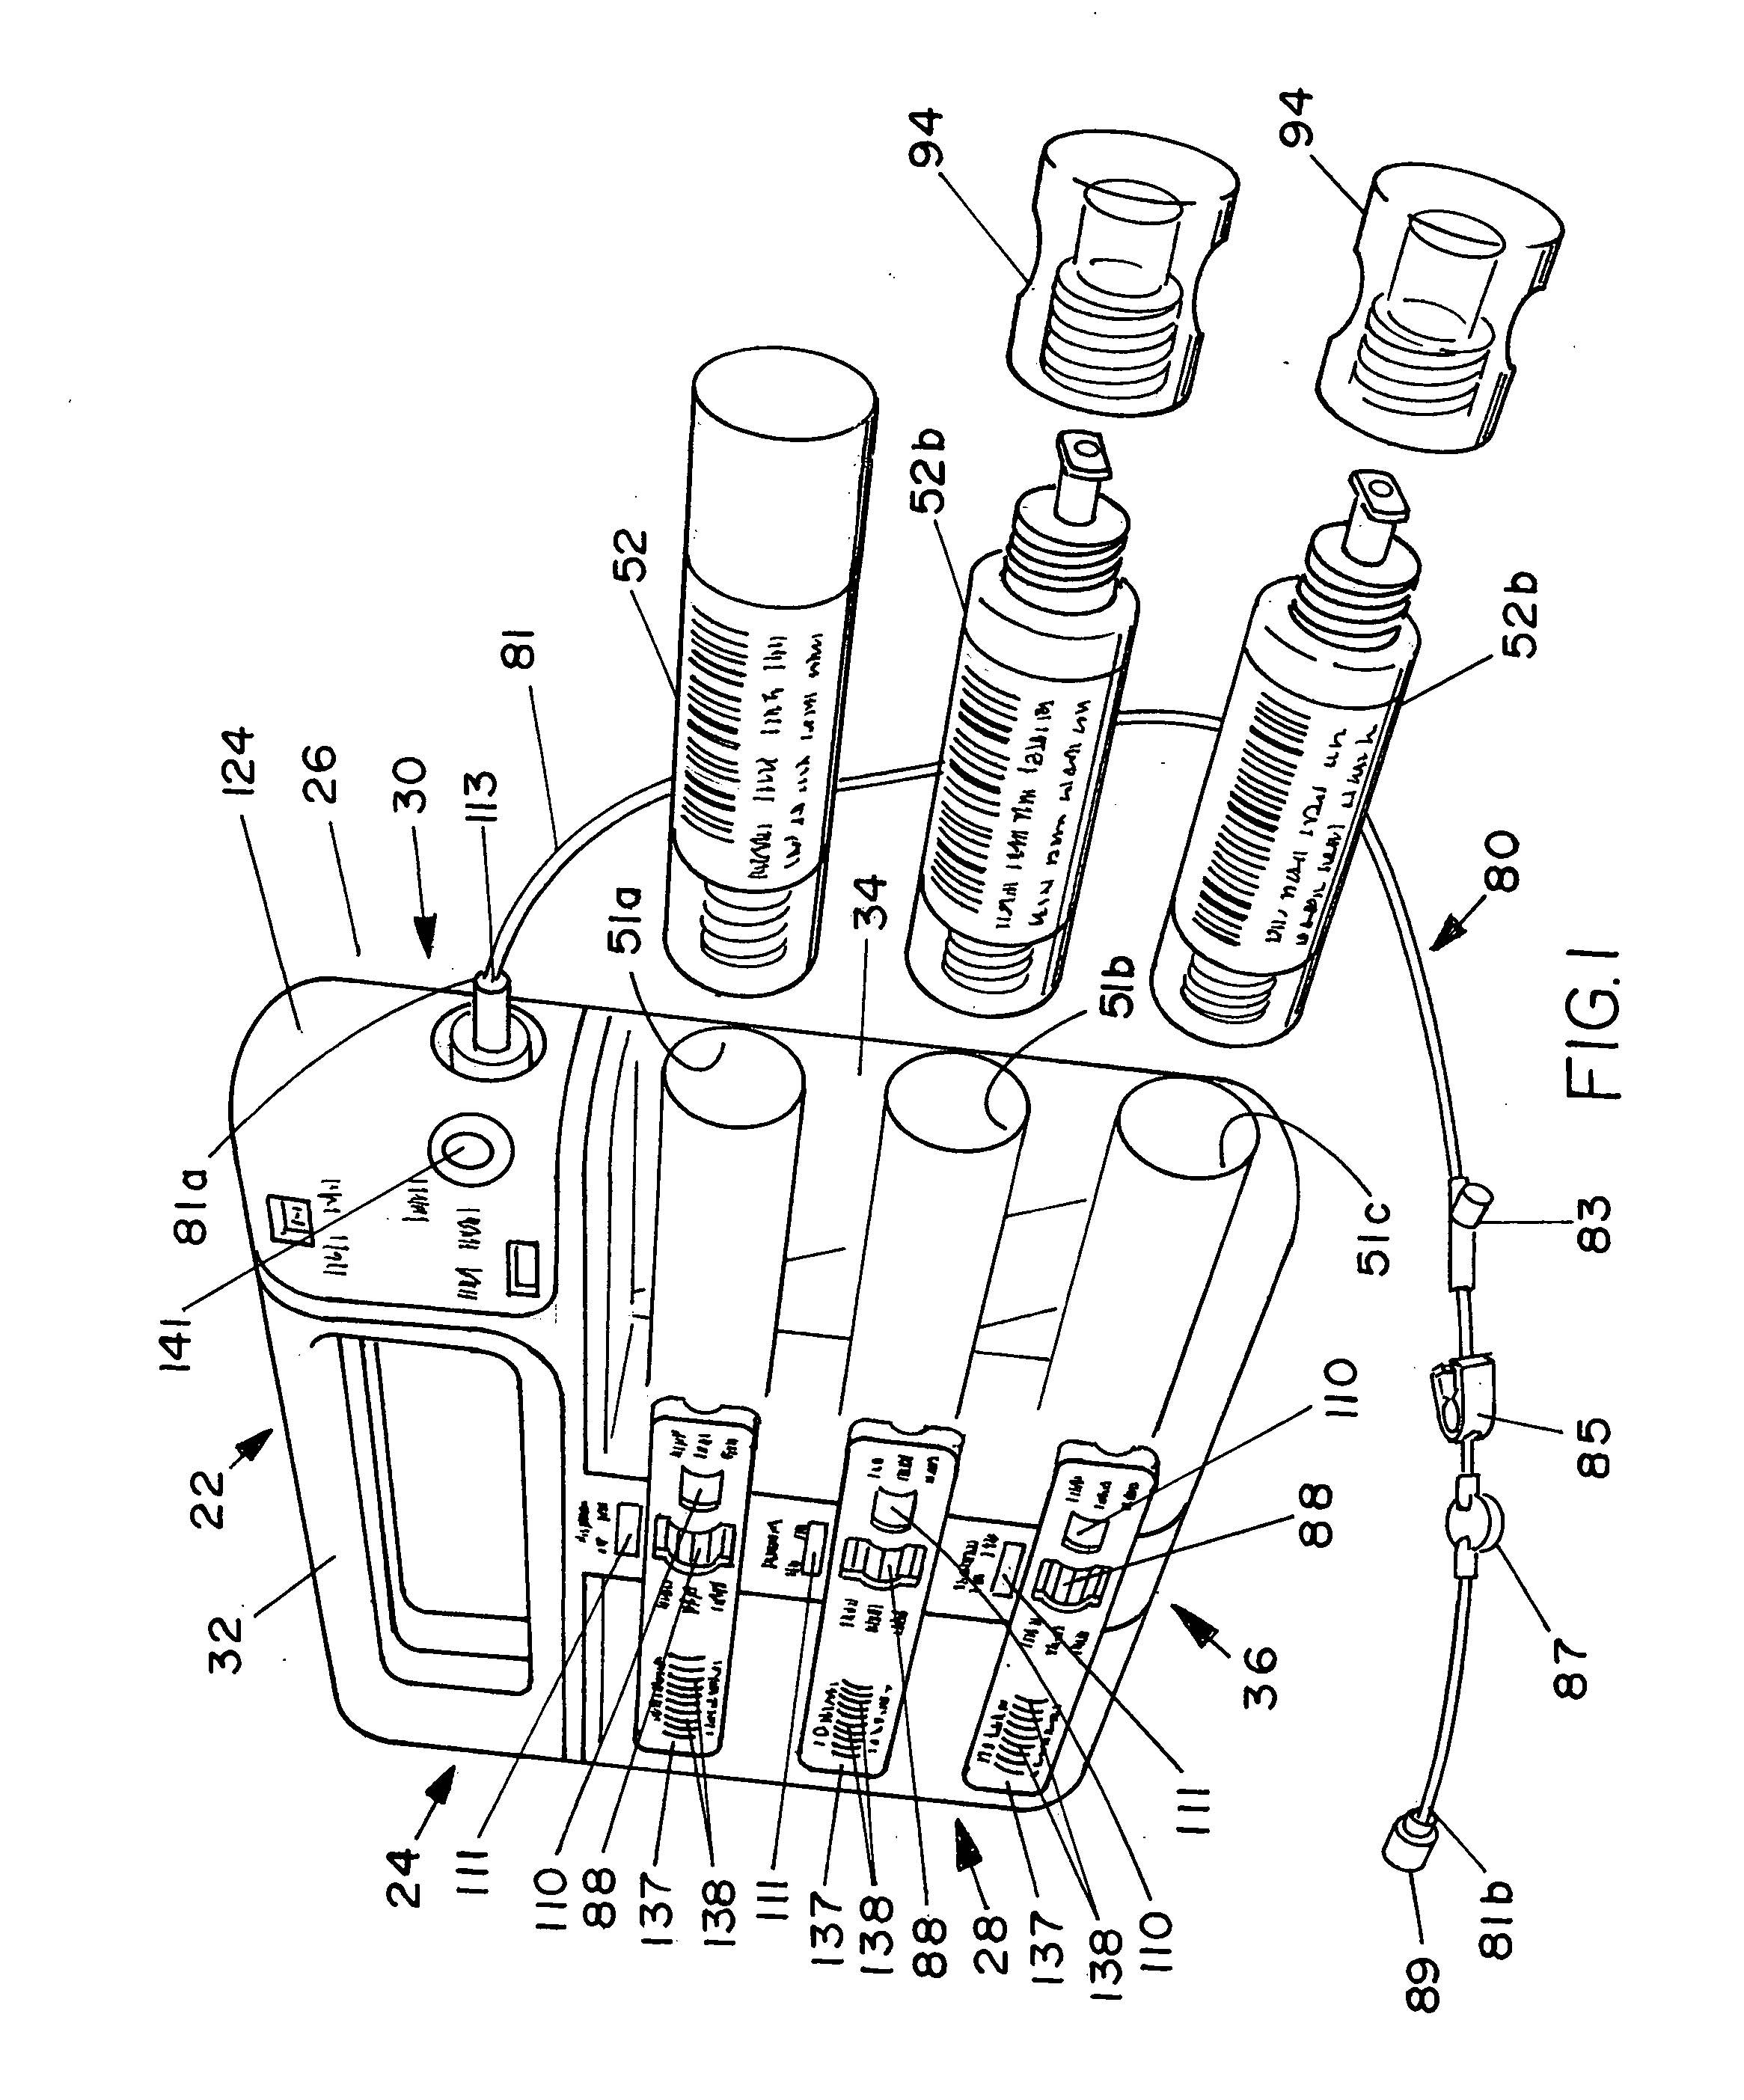 Multichannel fluid delivery device